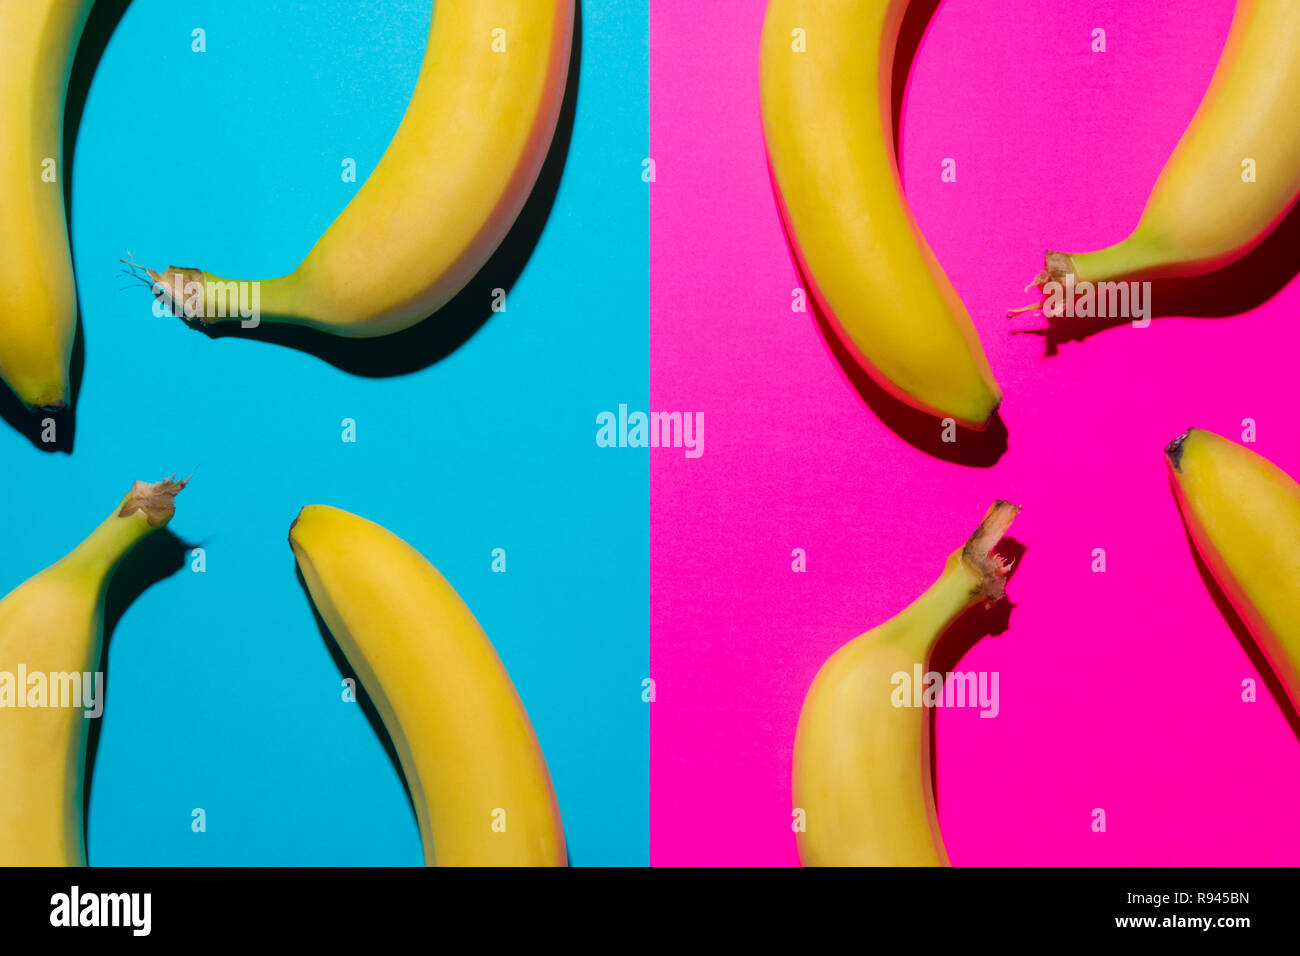 Top view of bananas over yellow and blue background. Pop art design. Stock Photo